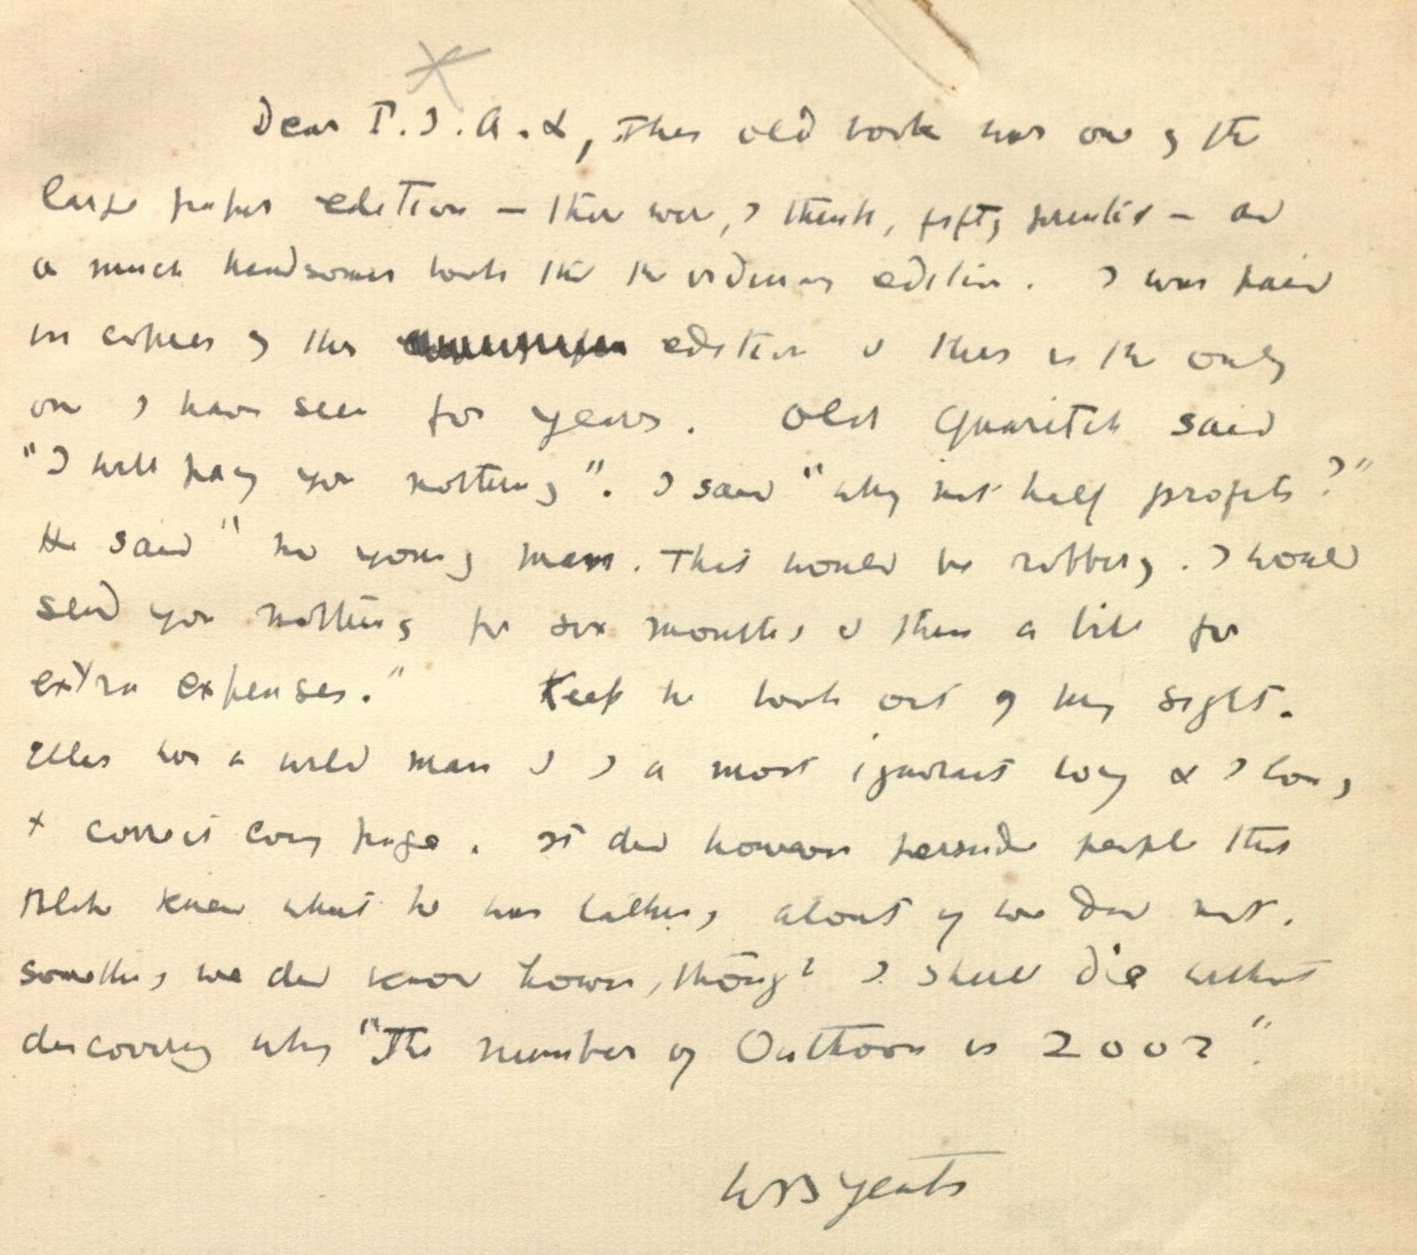 W. B. Yeats inscription to P. I. A. L. (Maud Gonne) in The Works of William Blake (1893)